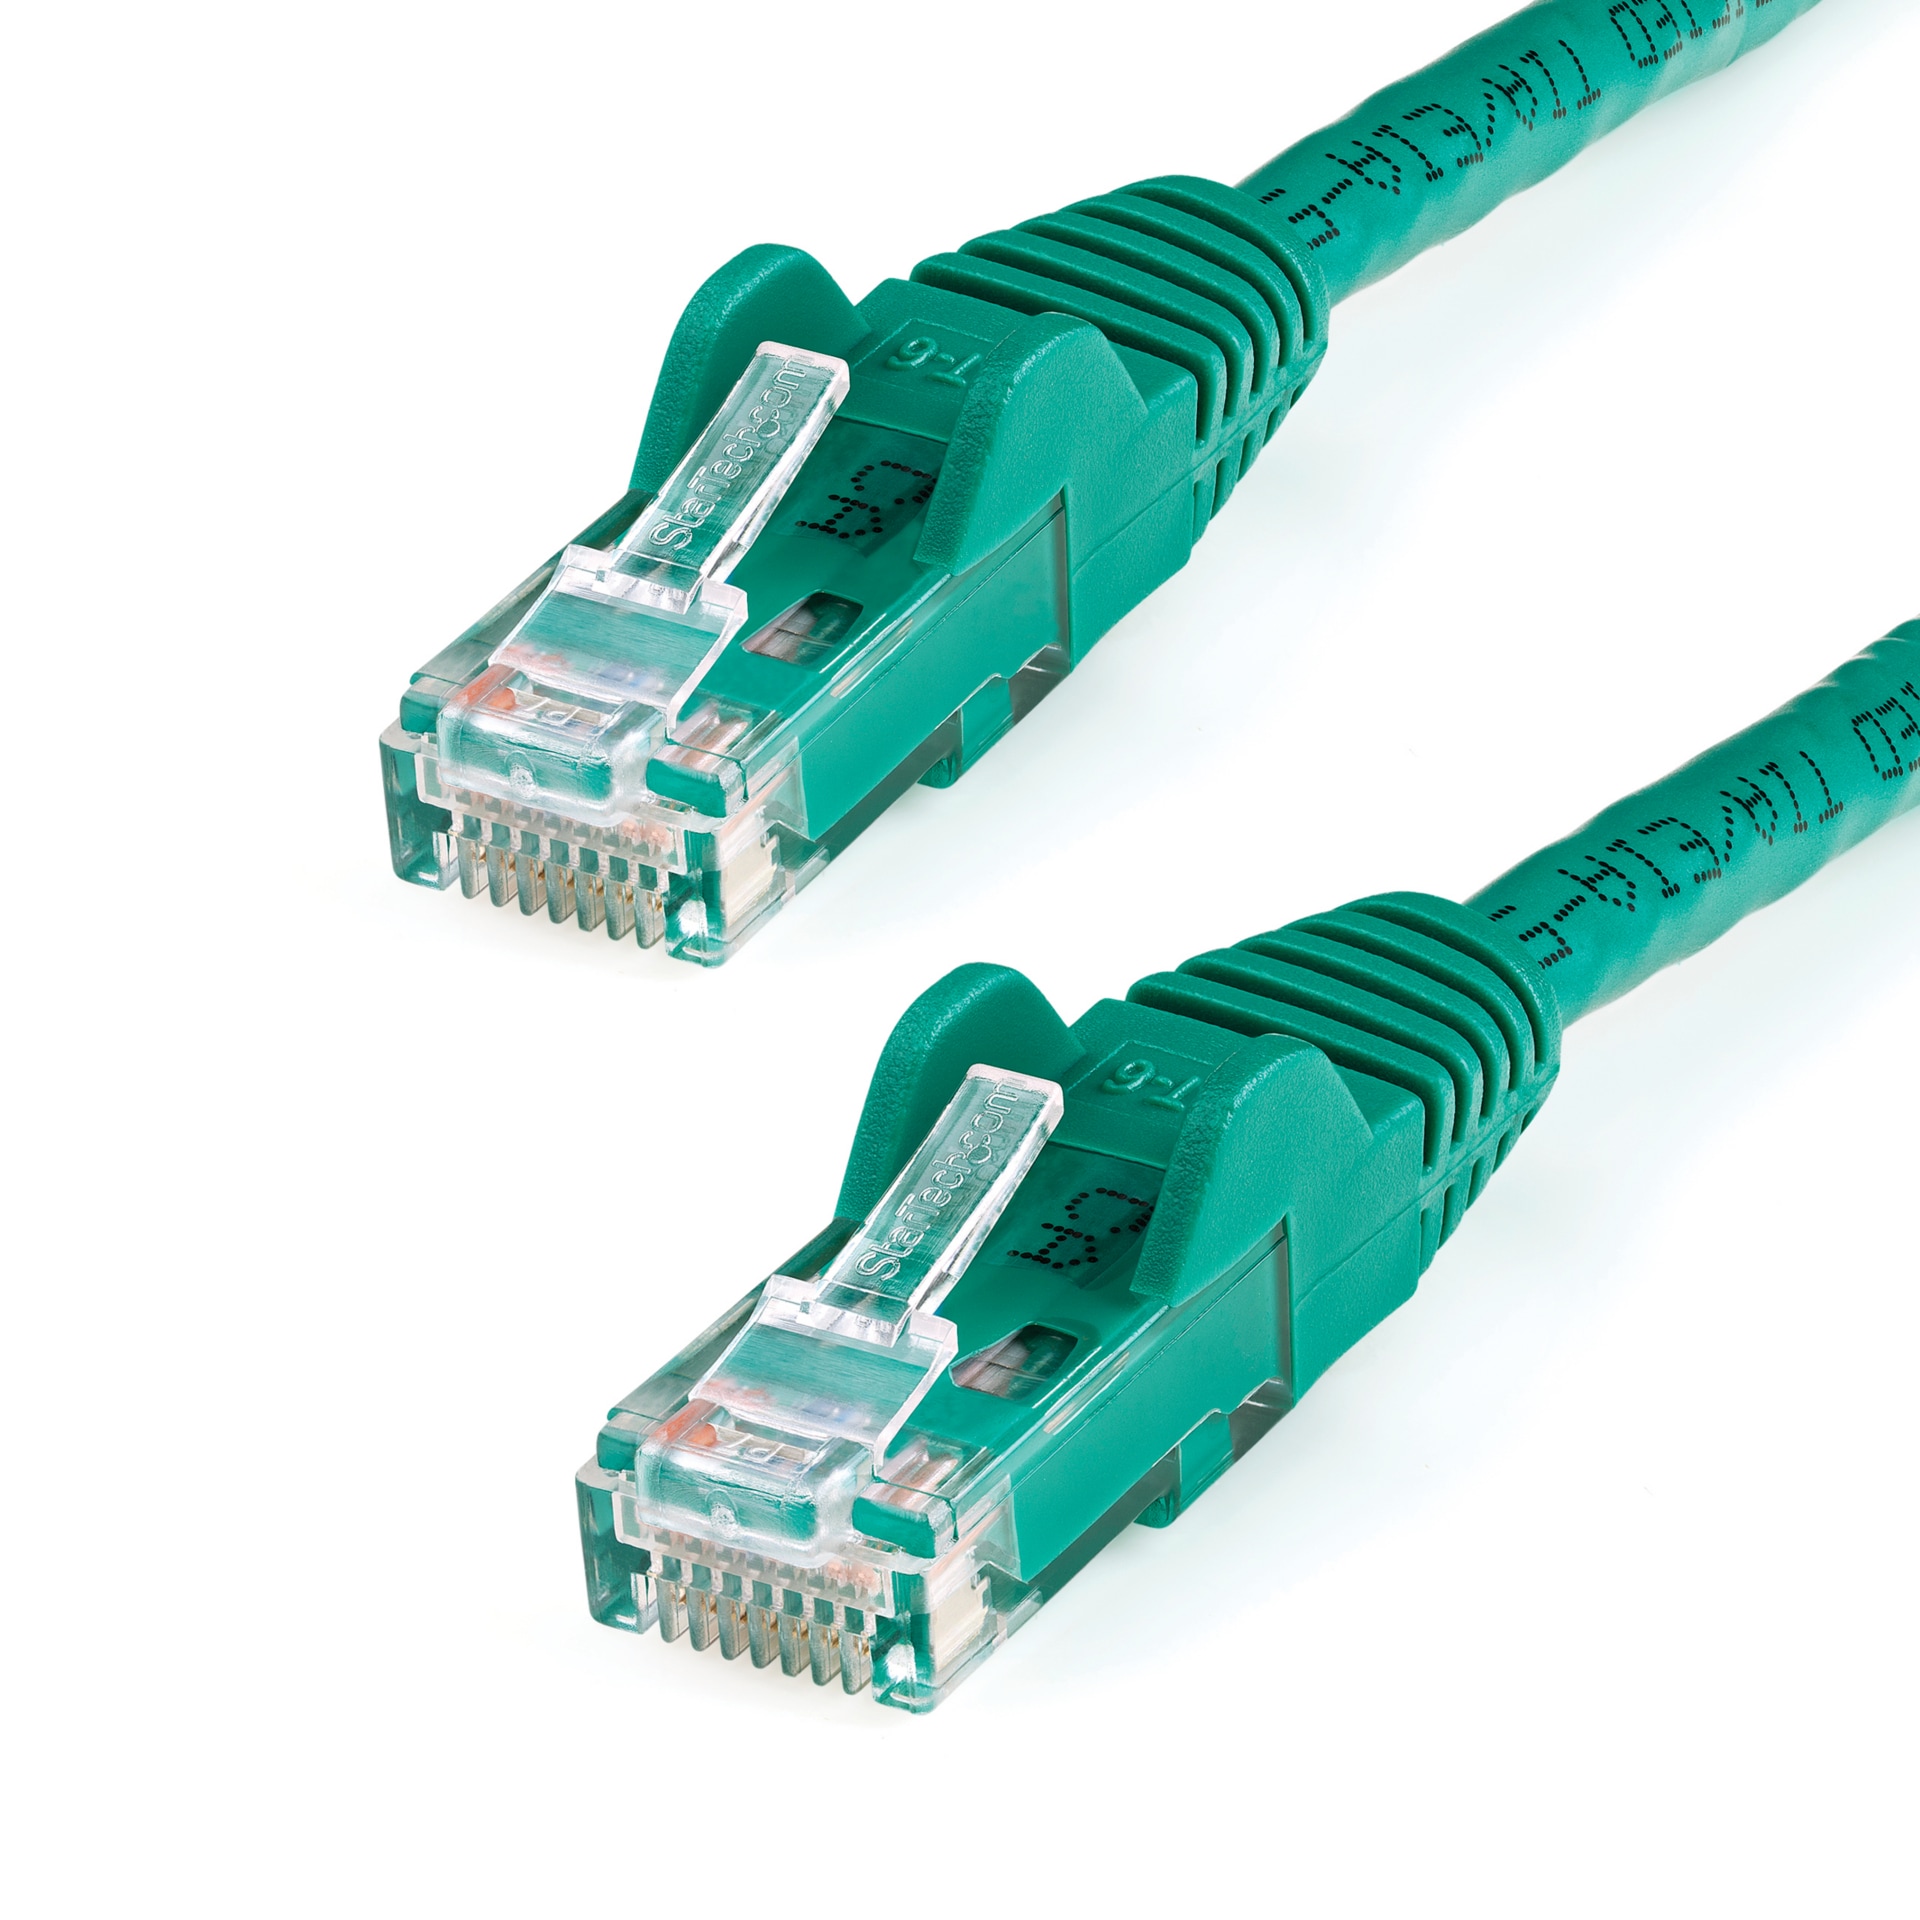 StarTech.com CAT6 Ethernet Cable 25' Green 650MHz PoE Snagless Patch Cord